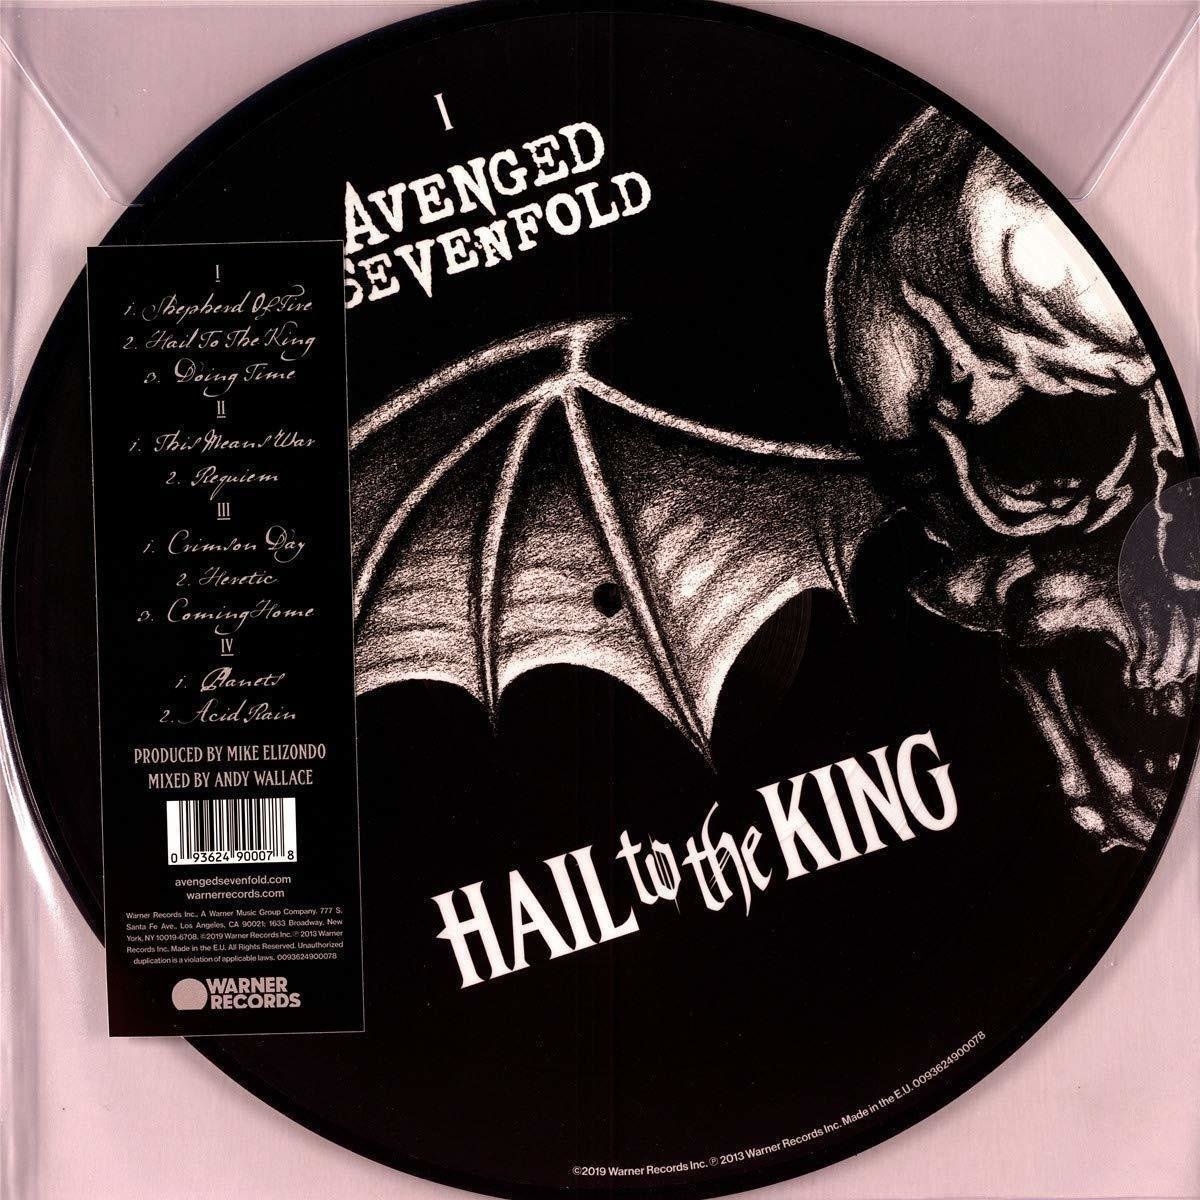 LP Avenged Sevenfold - Hail To The King (Picture Vinyl) (LP)